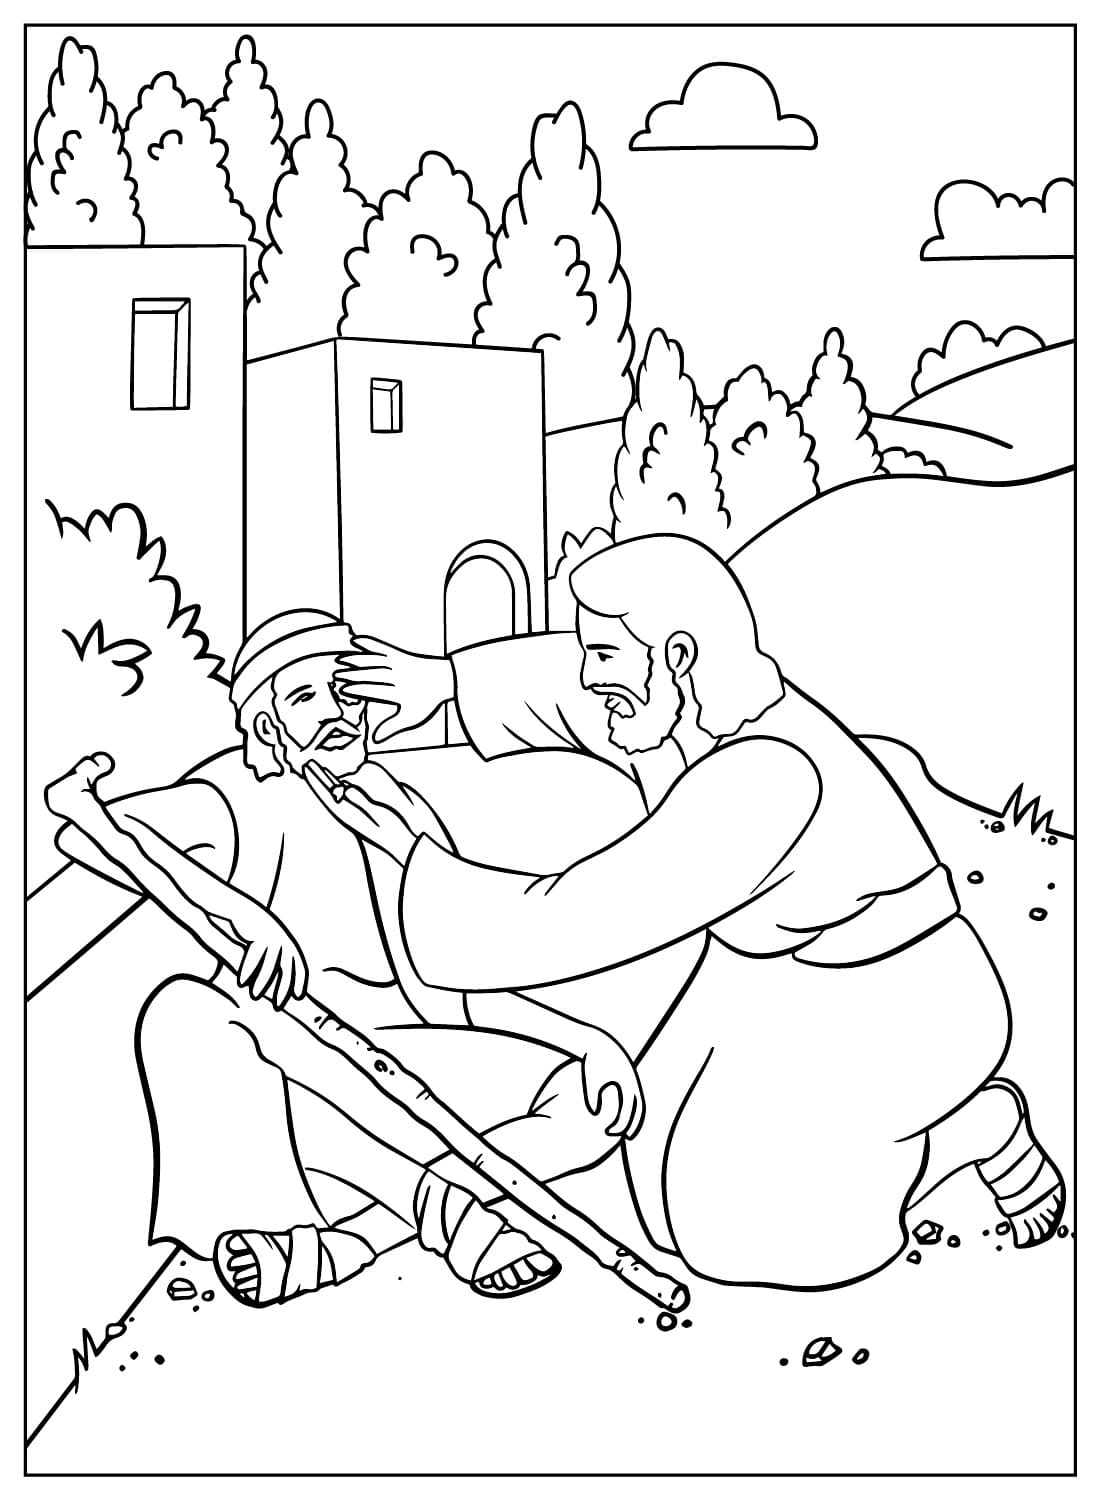 Jesus Heals a Blind Man Coloring Sheet from Jesus